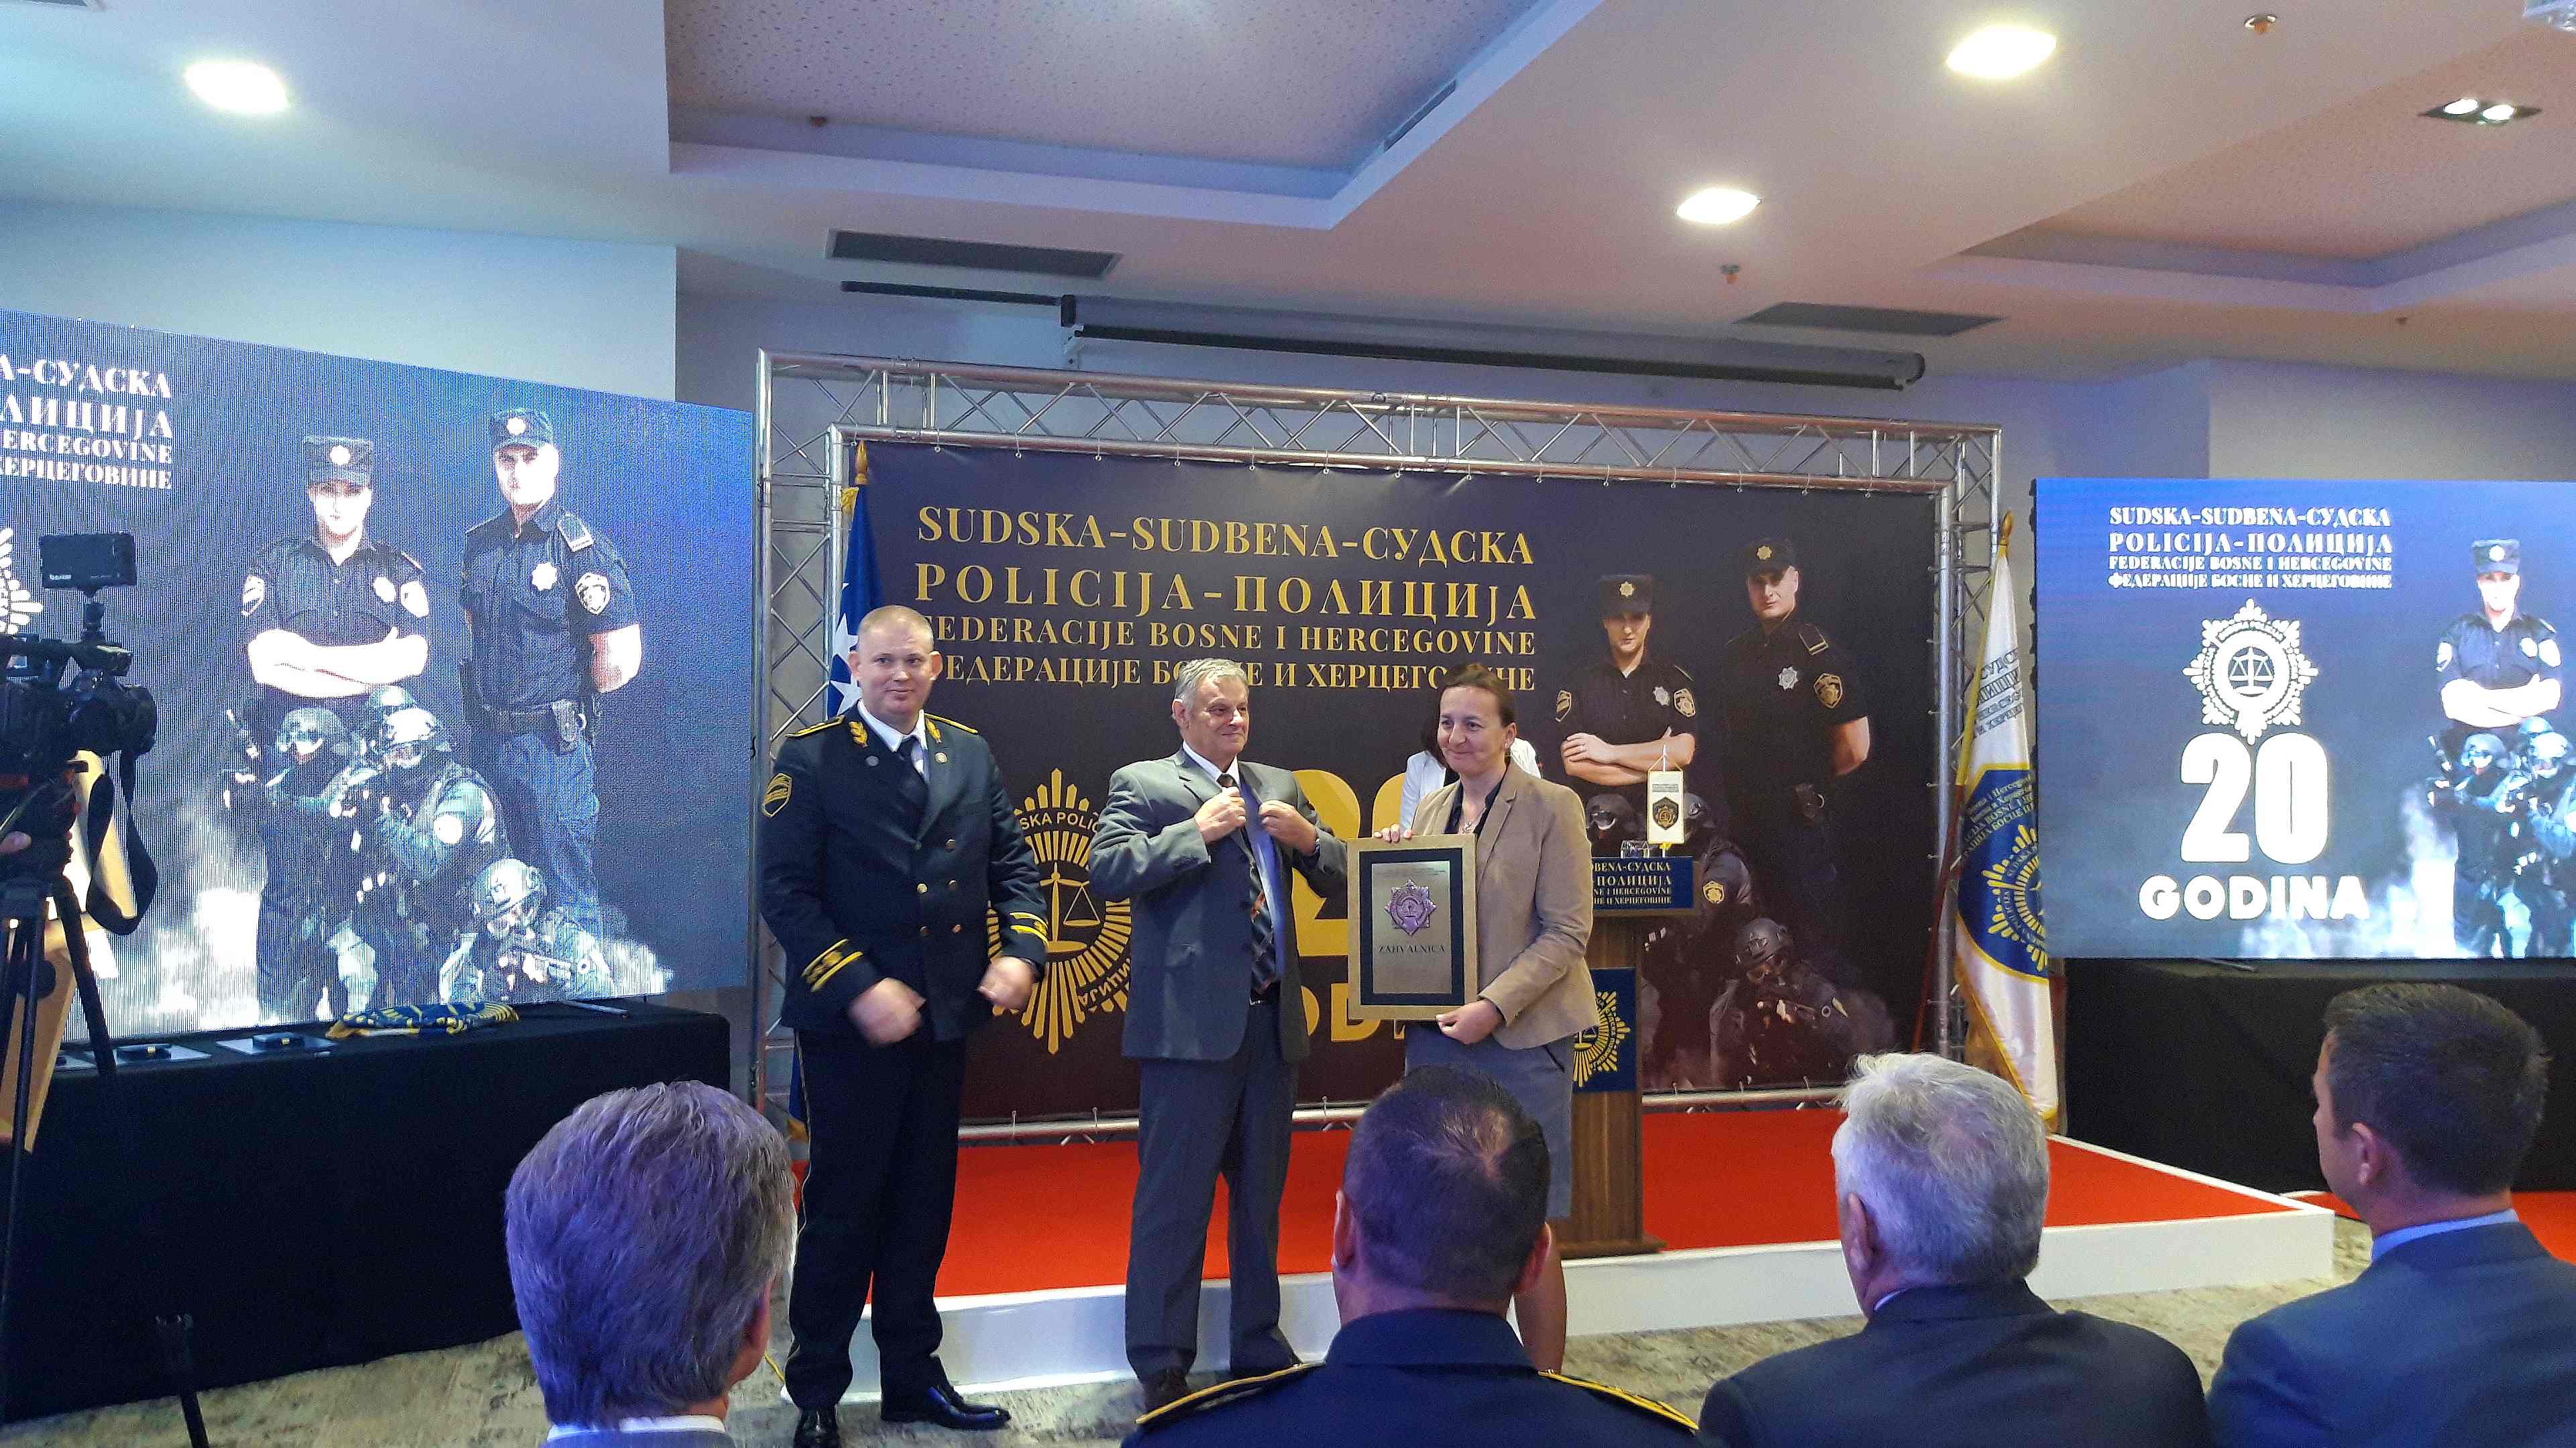 Twenty years of Court Police of the Federation of BiH celebrated with improvements in the human rights record among its professionals